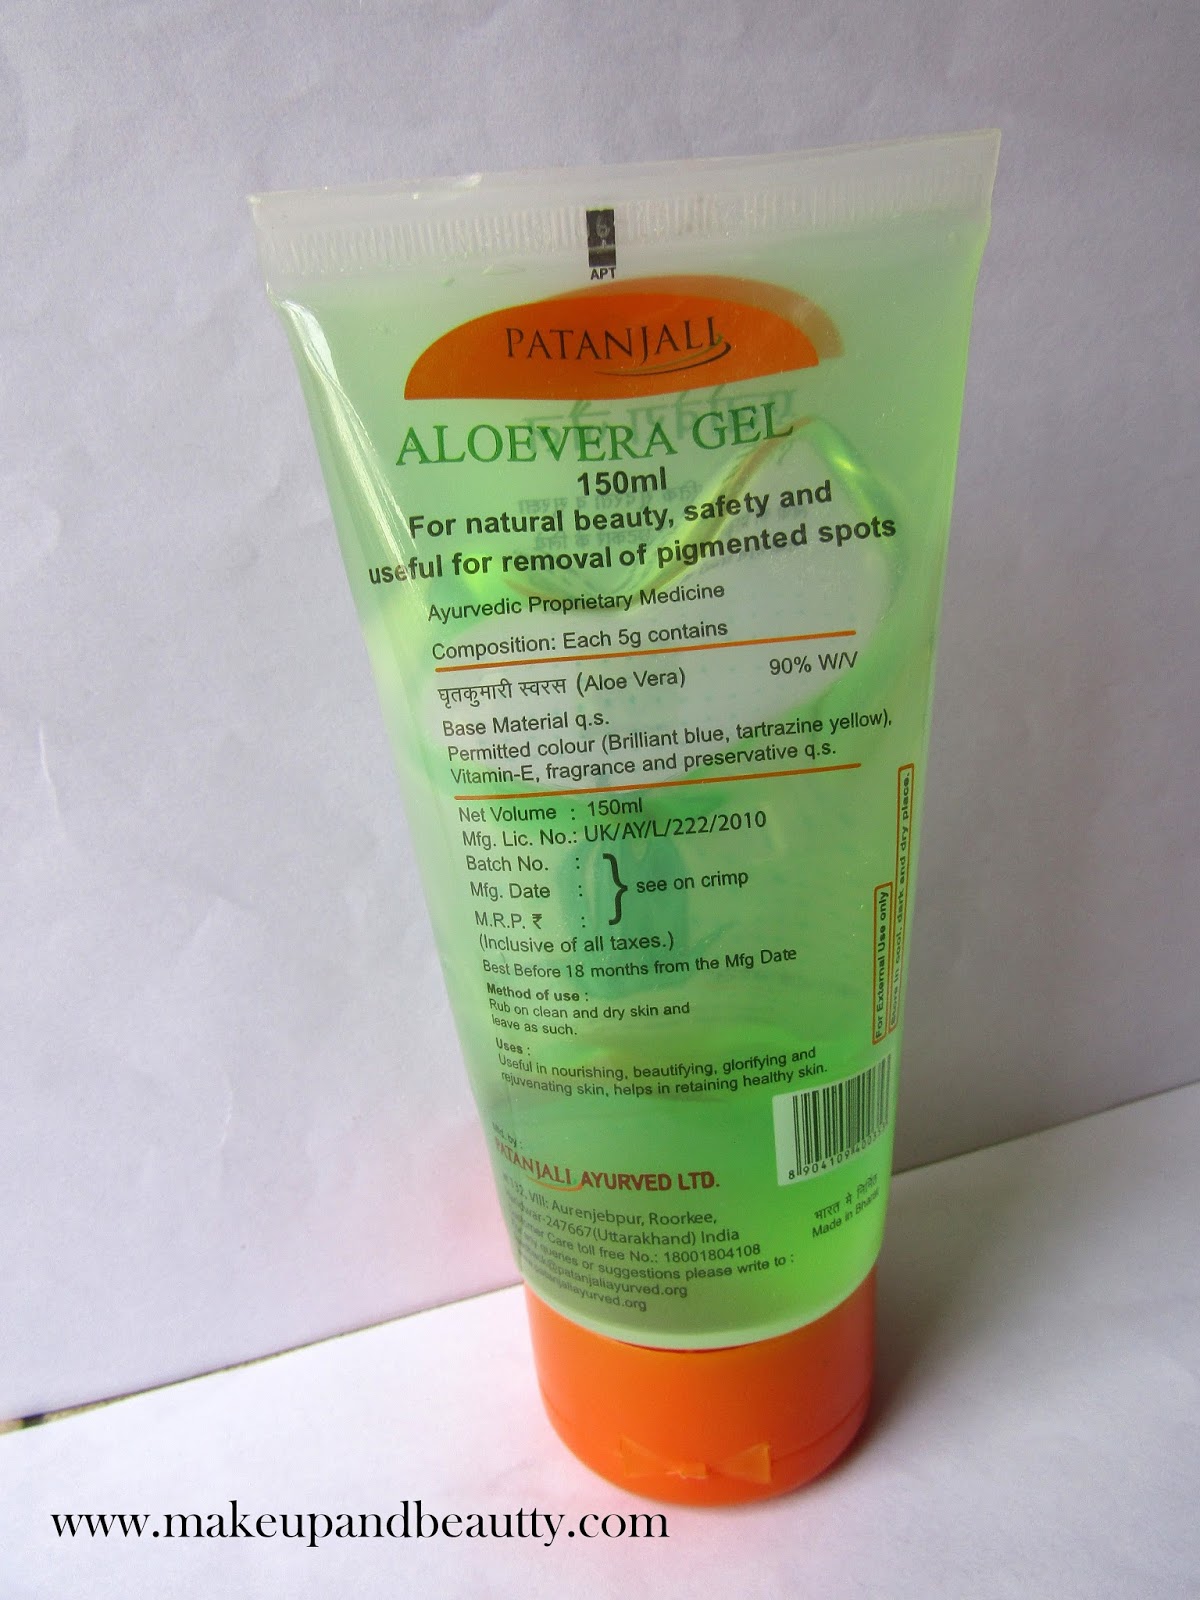 Makeup and beauty !!!: Review of Patanjali Aloevera Gel :-